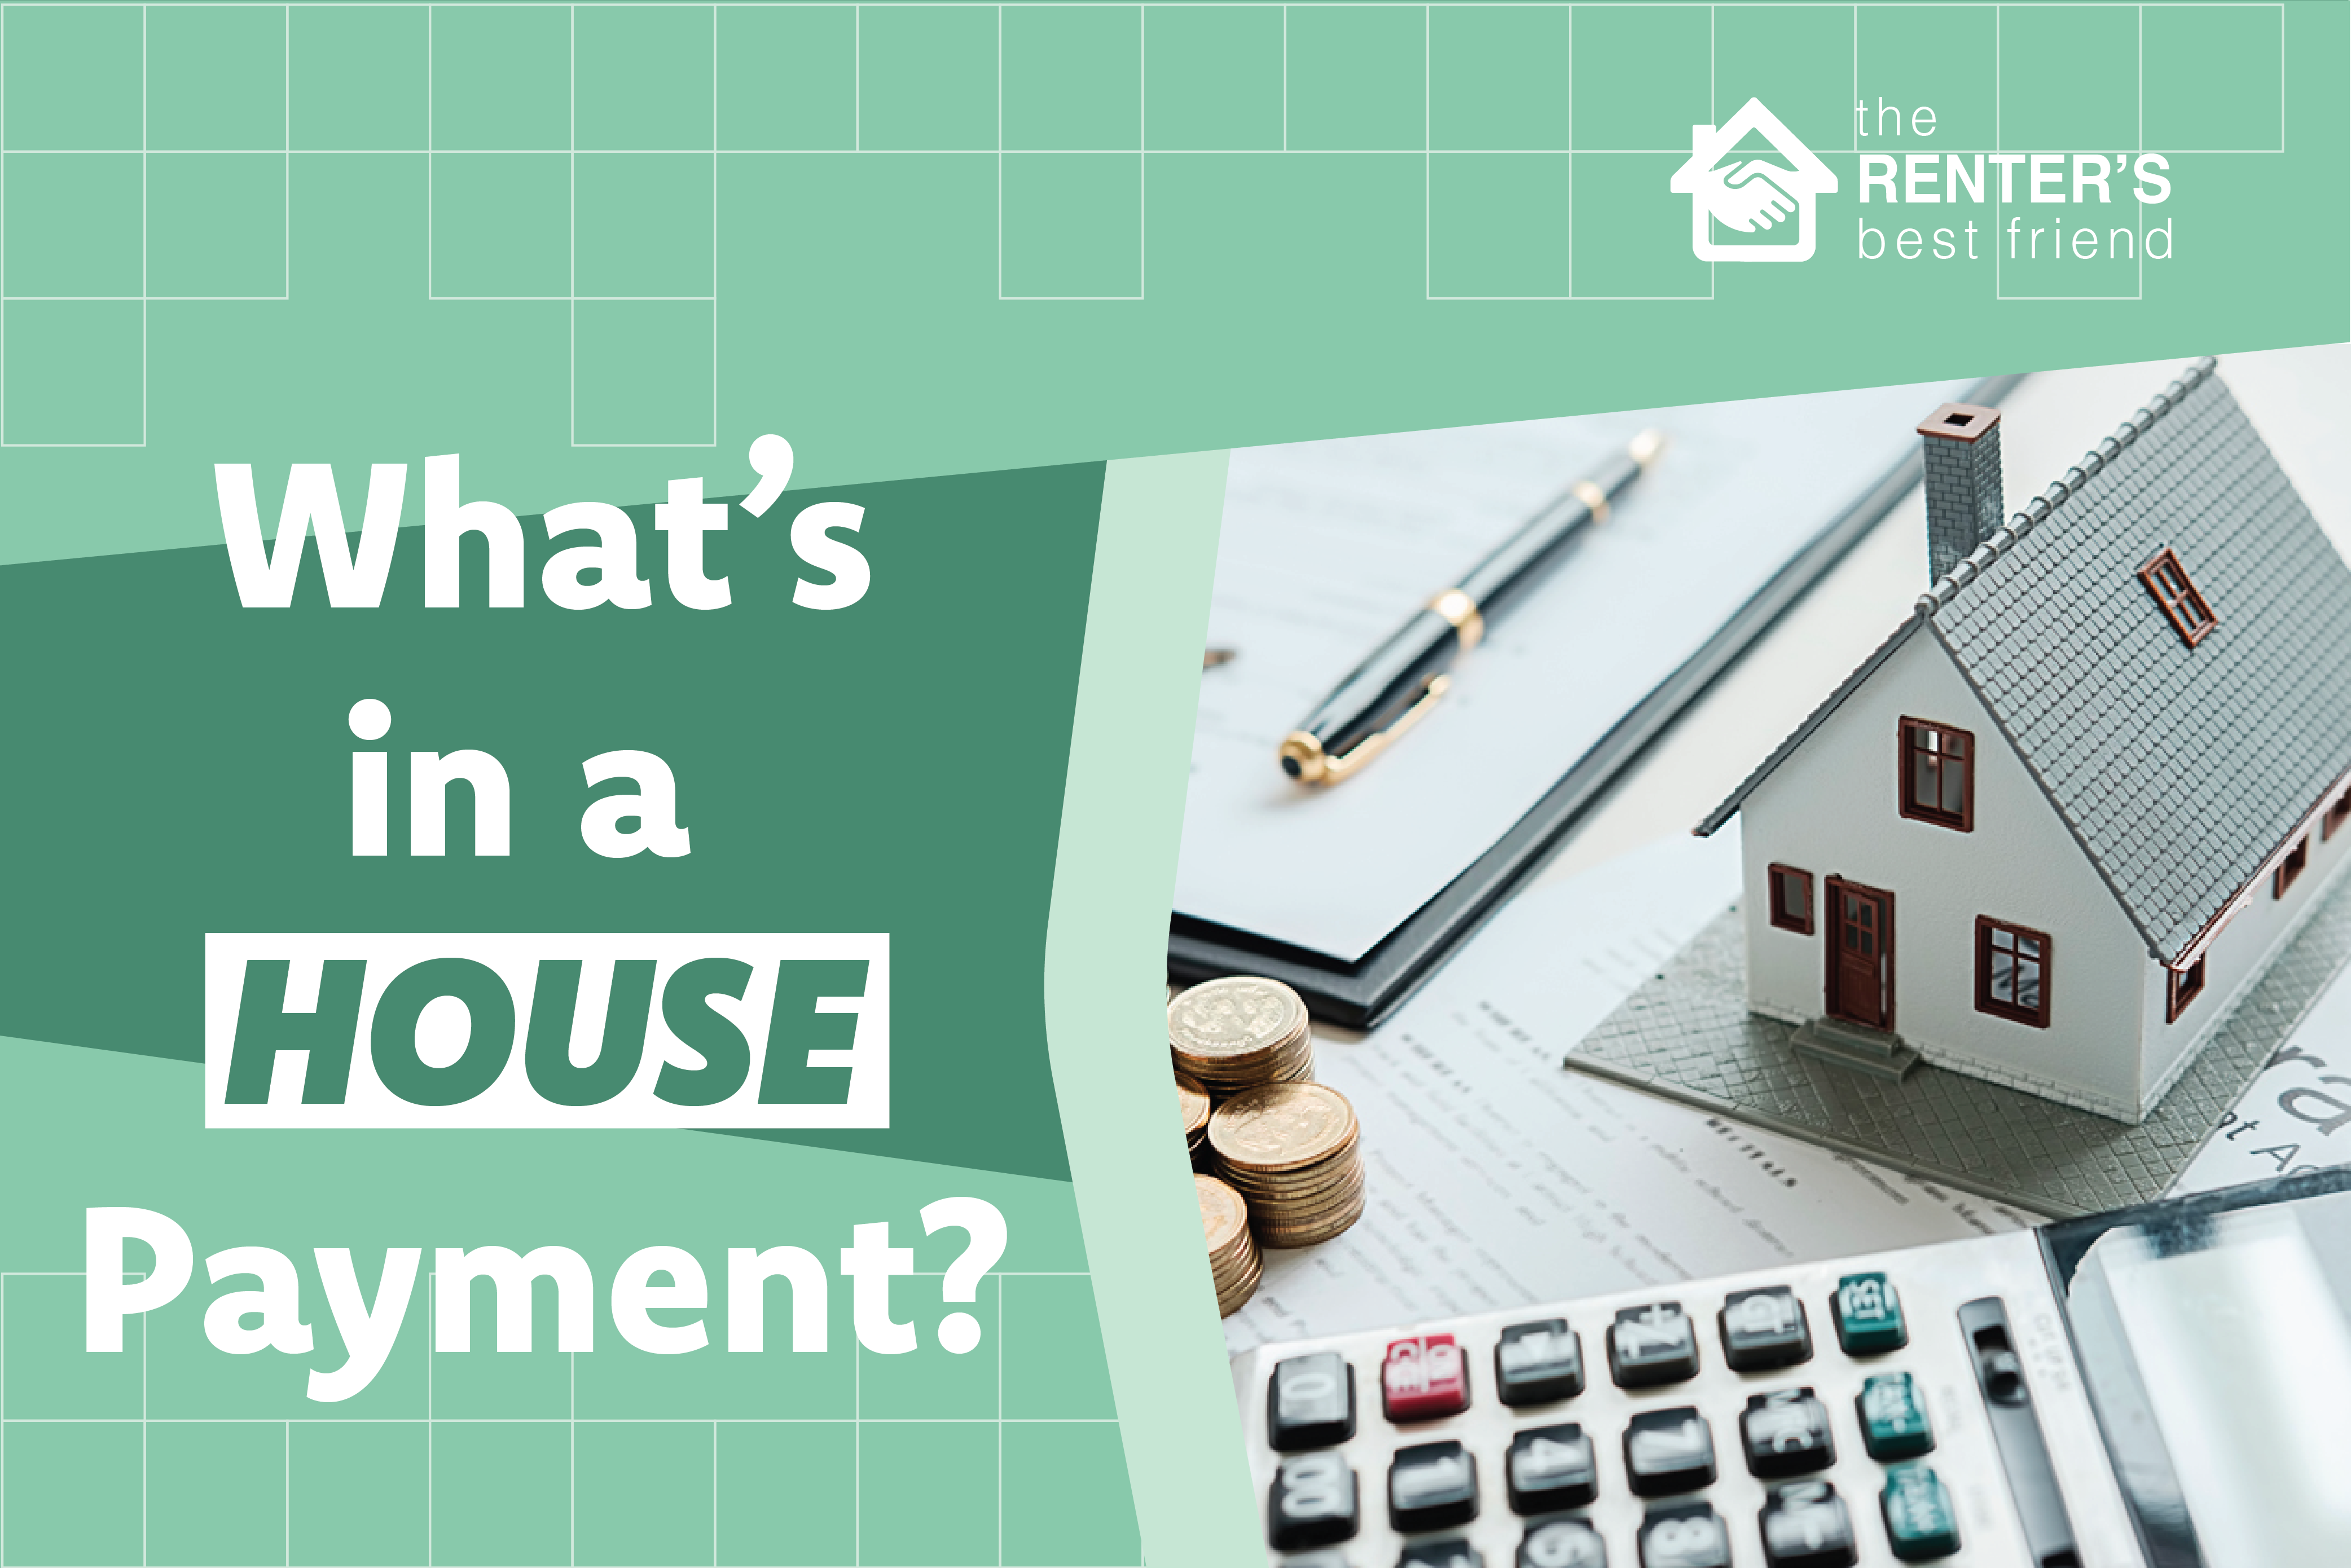 whats in a house payment?